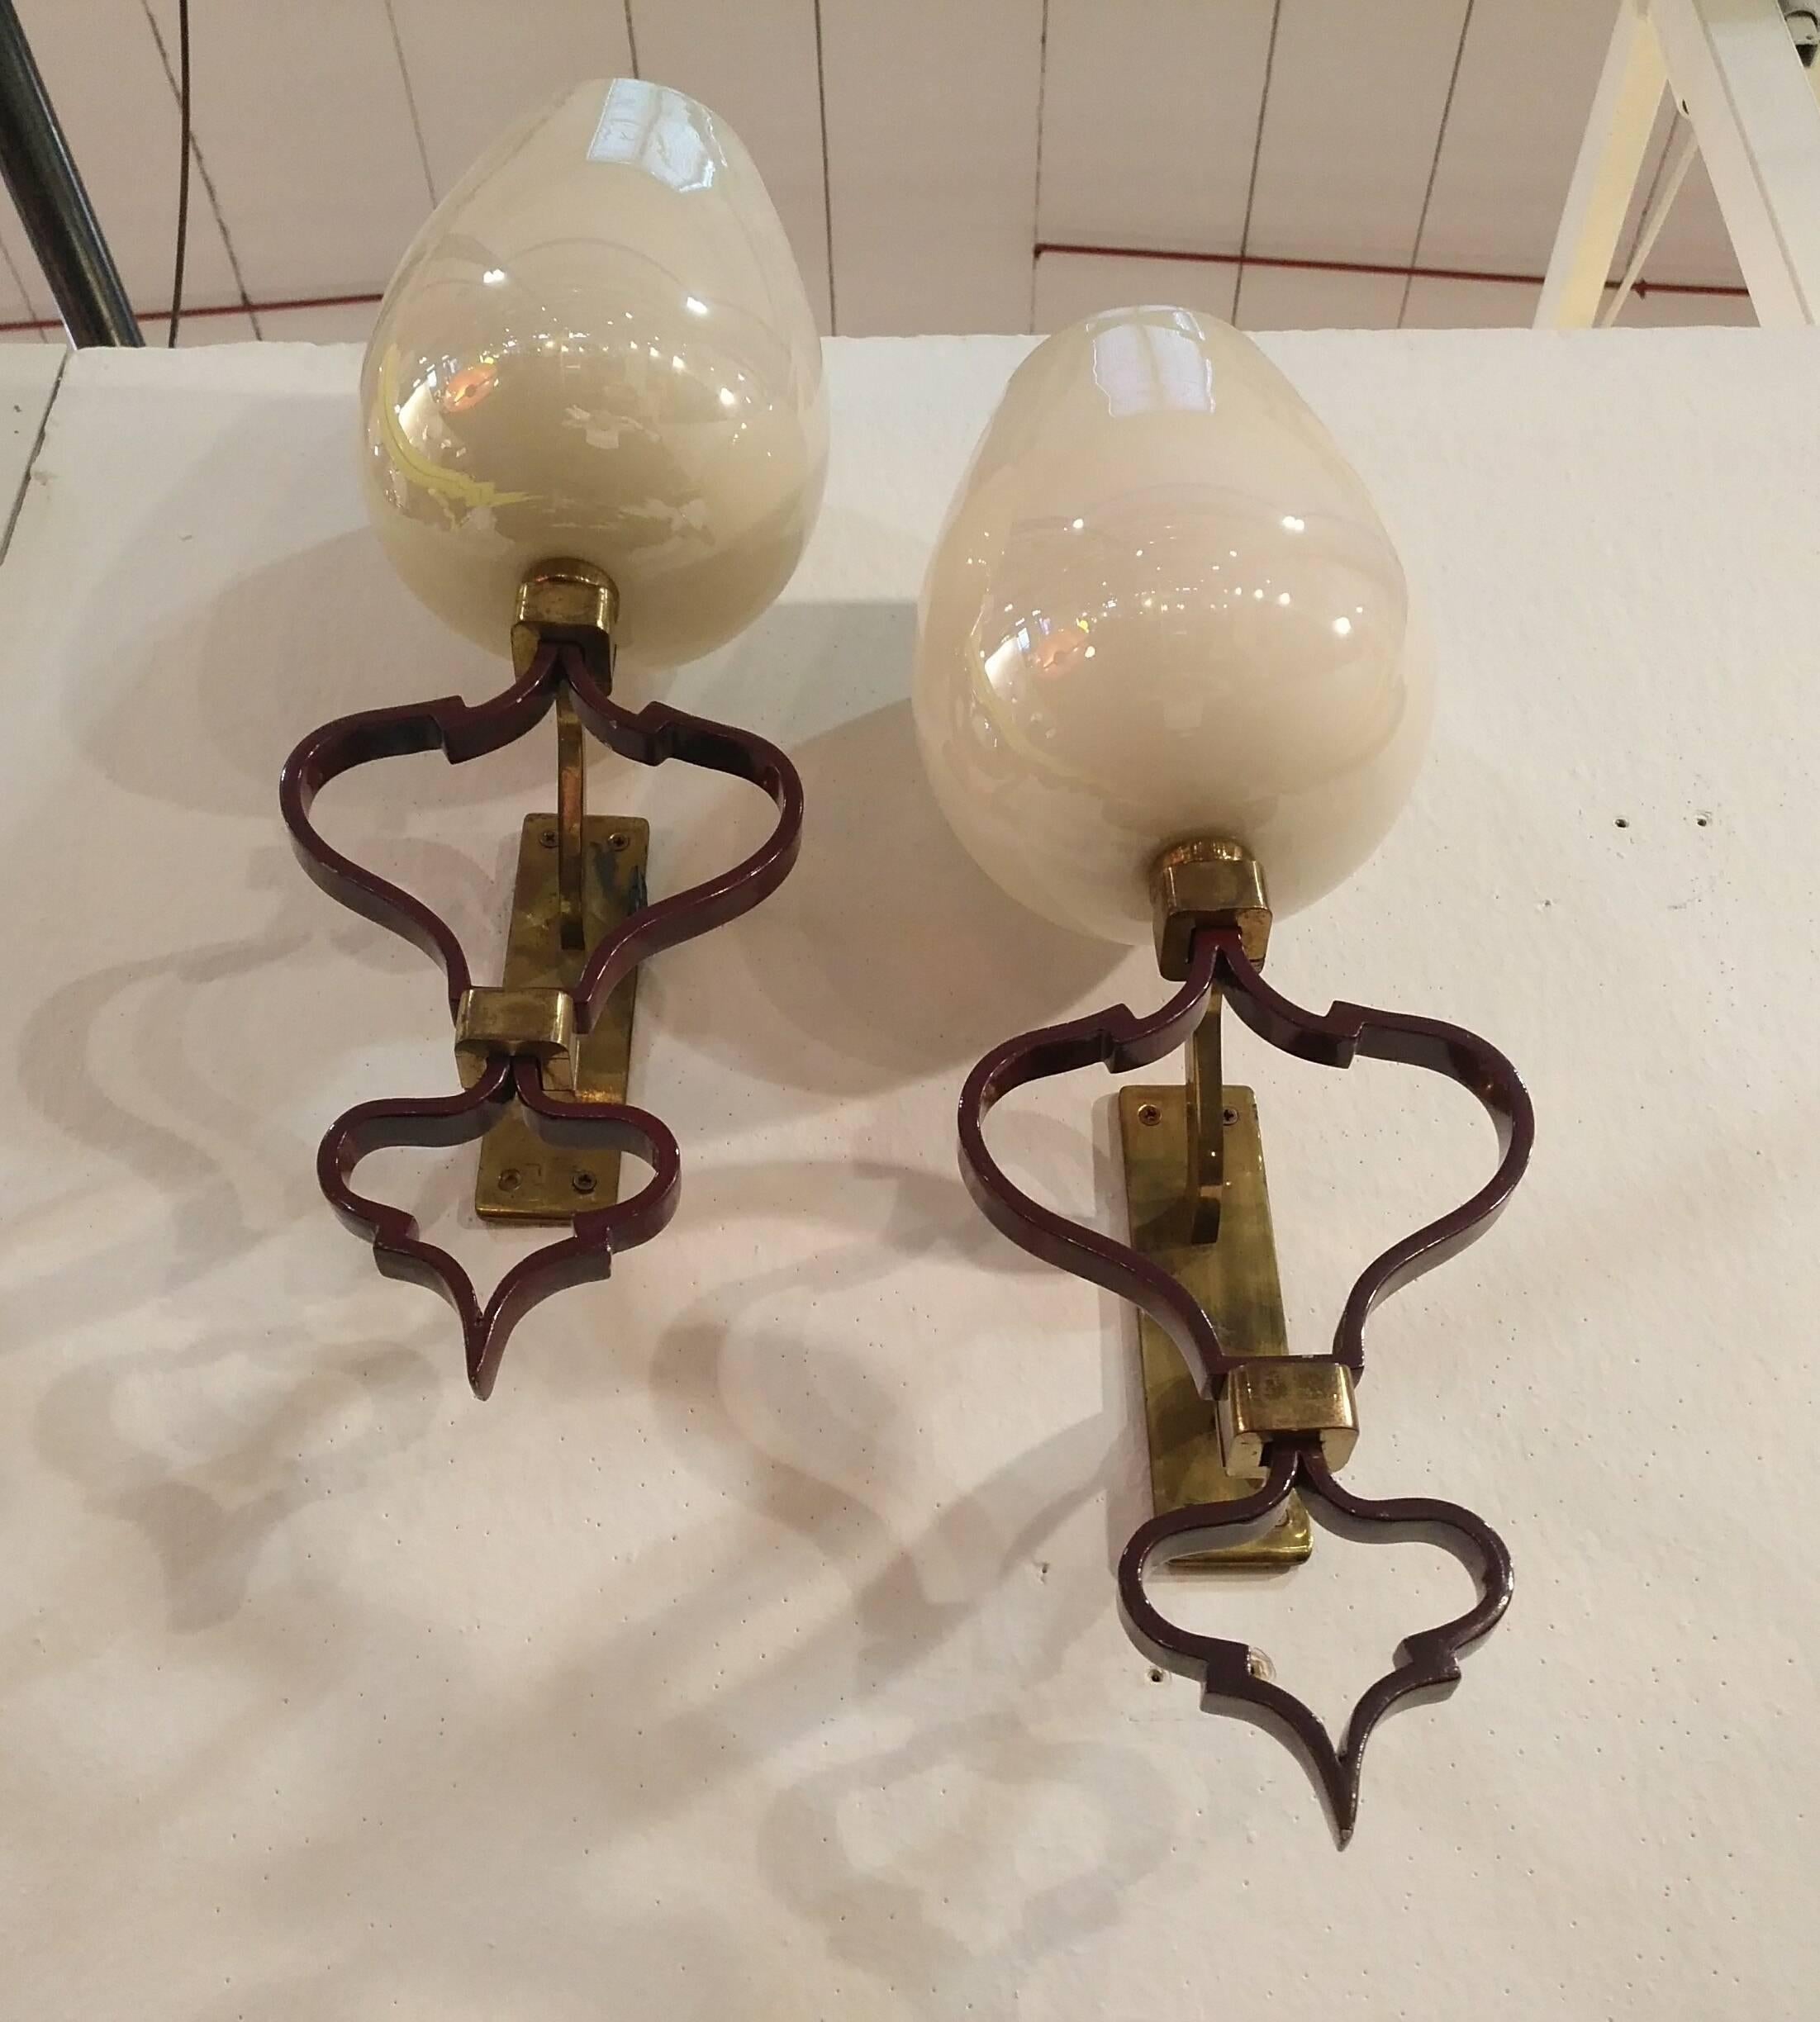 Pair of wall sconces with bordeaux lacquered brass and polished brass structure, large glass cup iridescent opaline as diffuser
The beautiful glass cups are made by Seguso Murano in 1950.